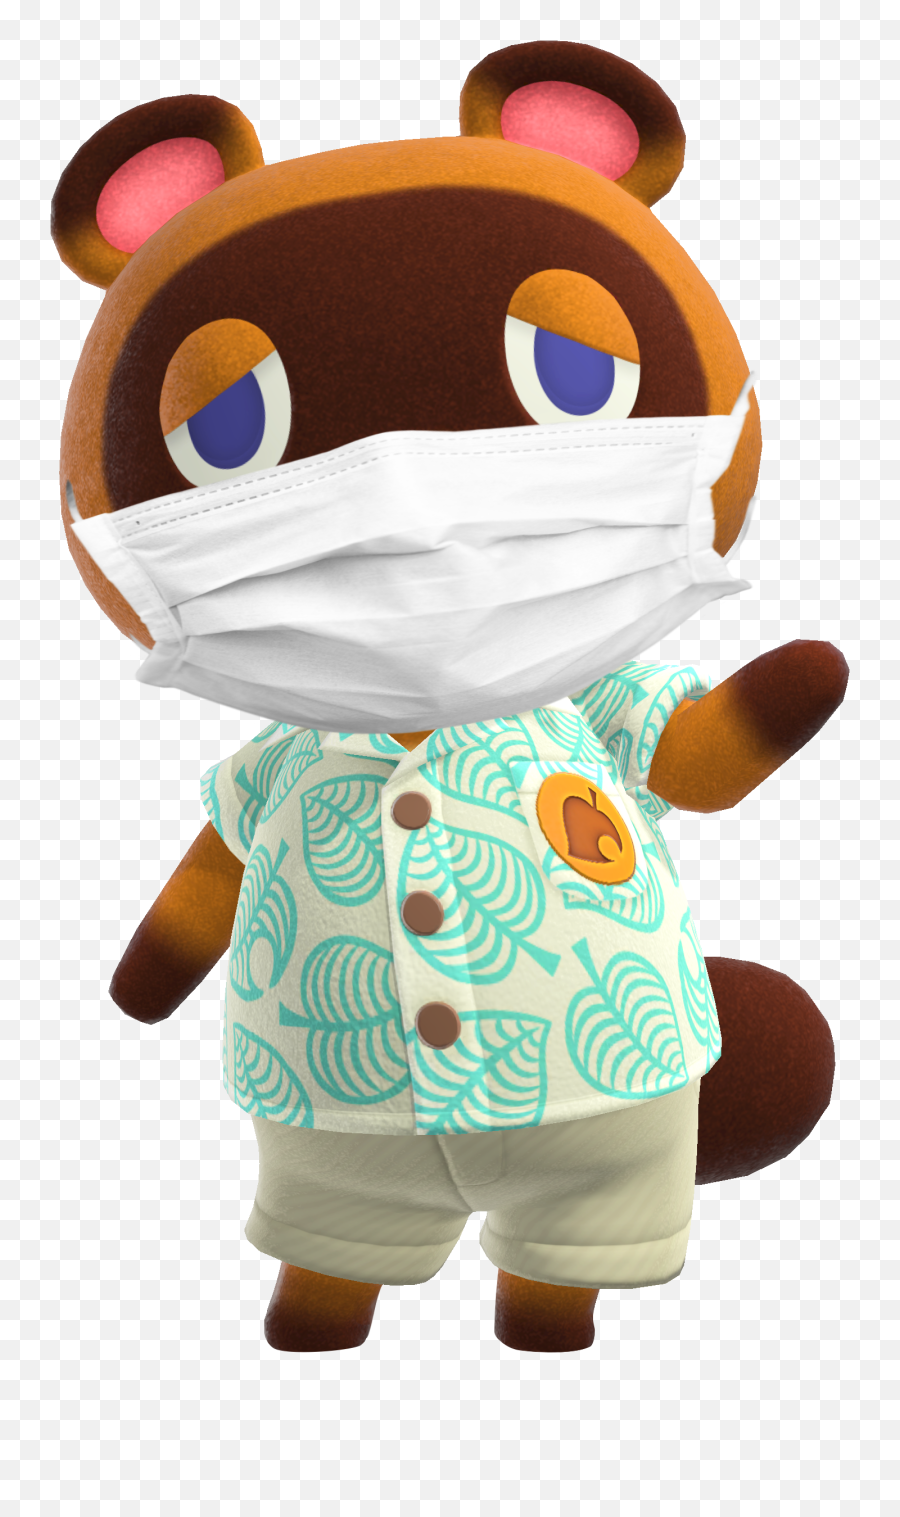 The Most Edited Tomnook Picsart - Animal Crossing New Horizons Tom Nook Emoji,Like Whaaat Emoticon